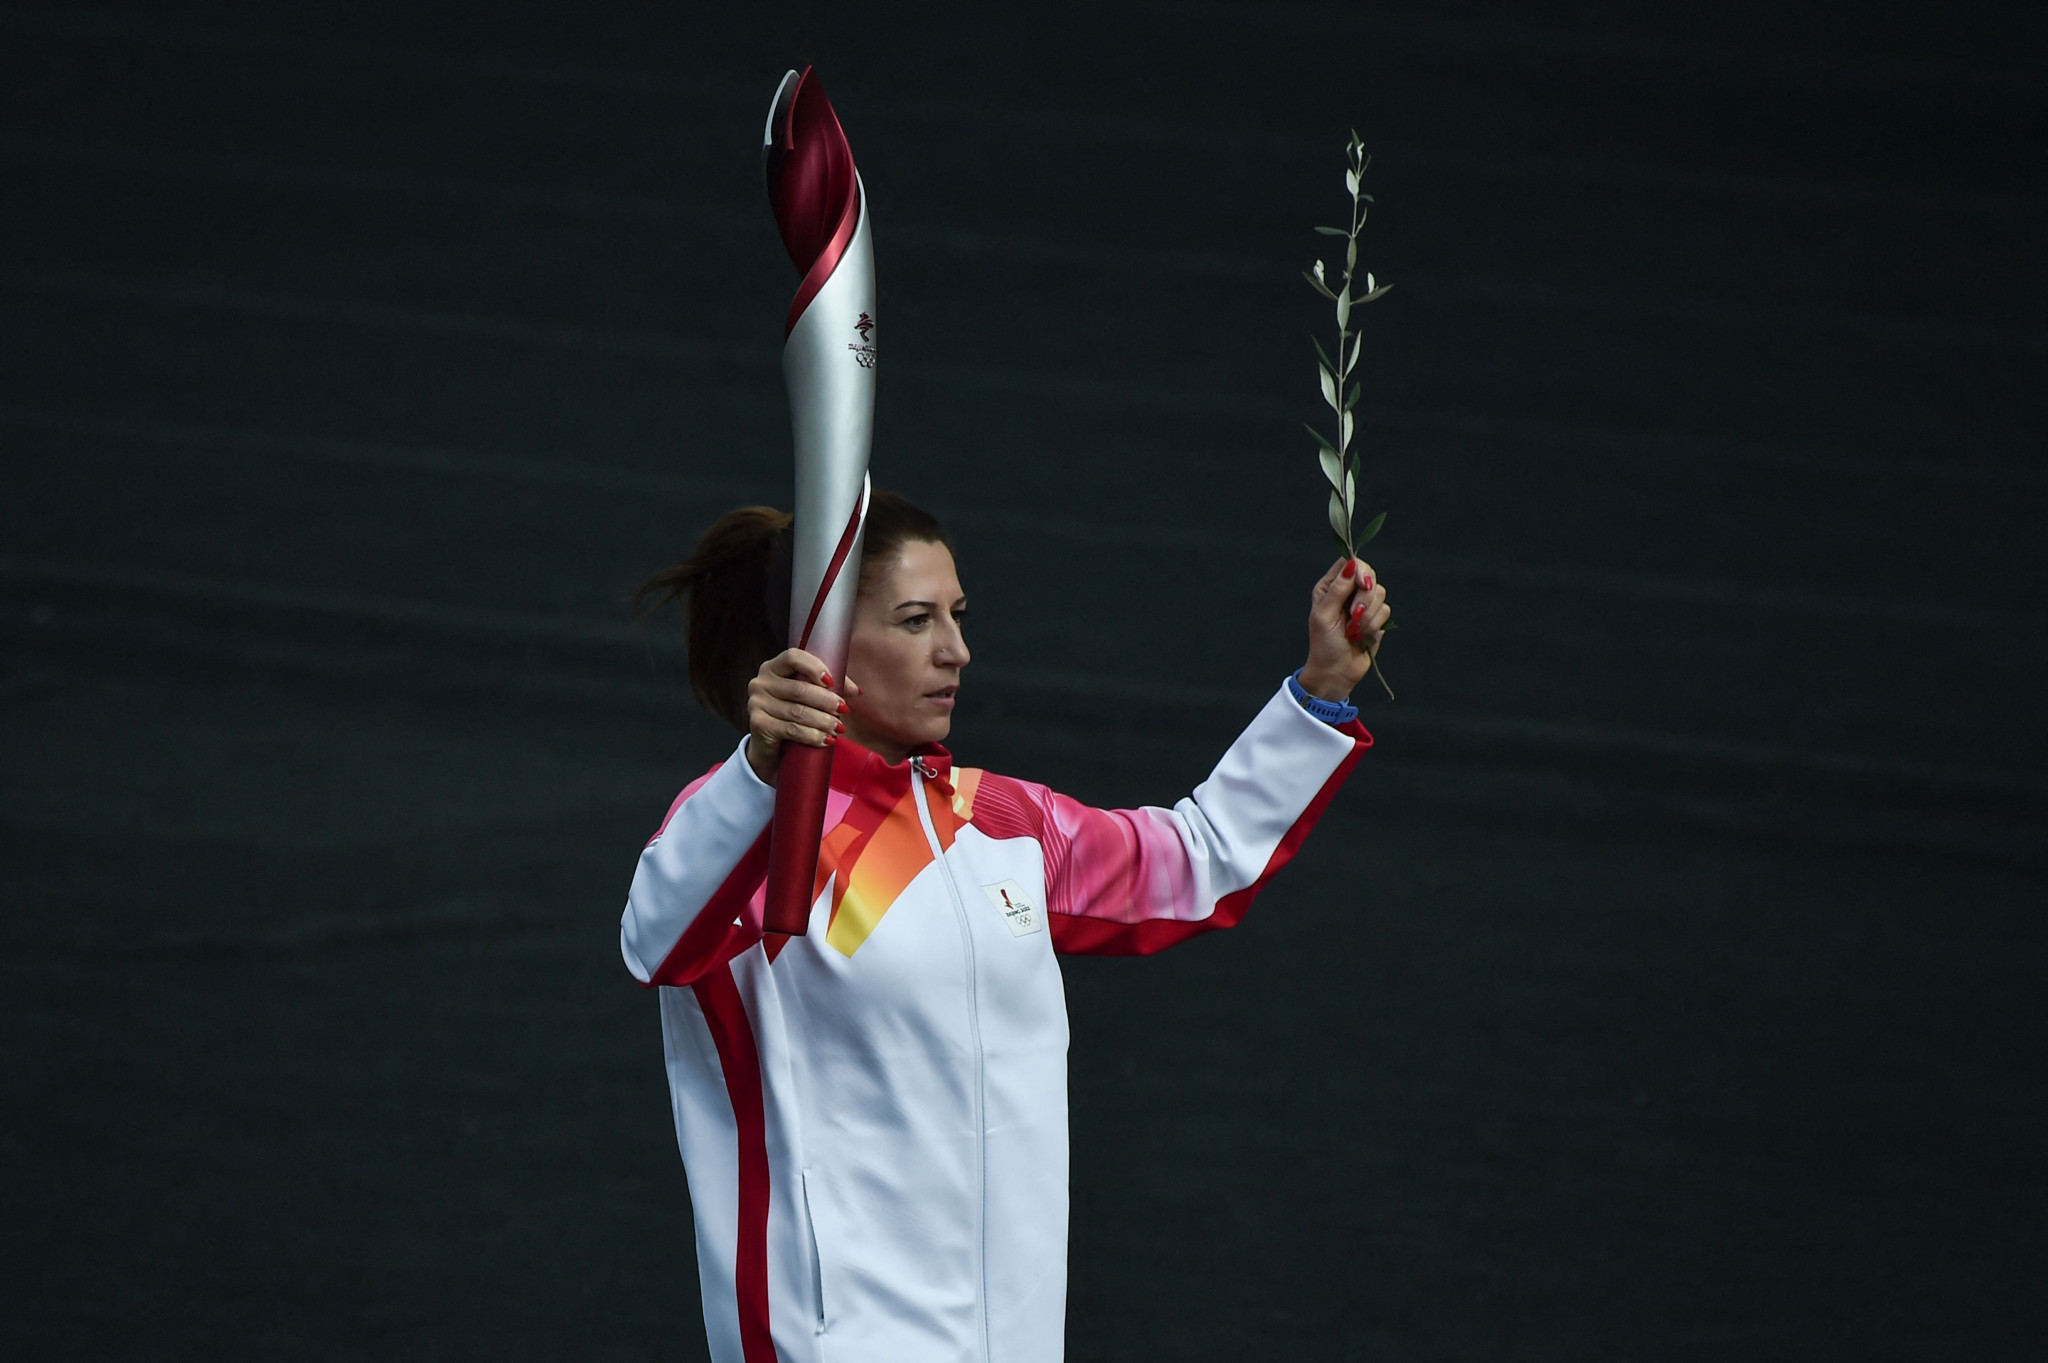 Paraskevi Ladopoulou enters the Panathenaic Stadium with the Torch during the Beijing 2022 Olympic Flame Handover Ceremony ©Getty Images